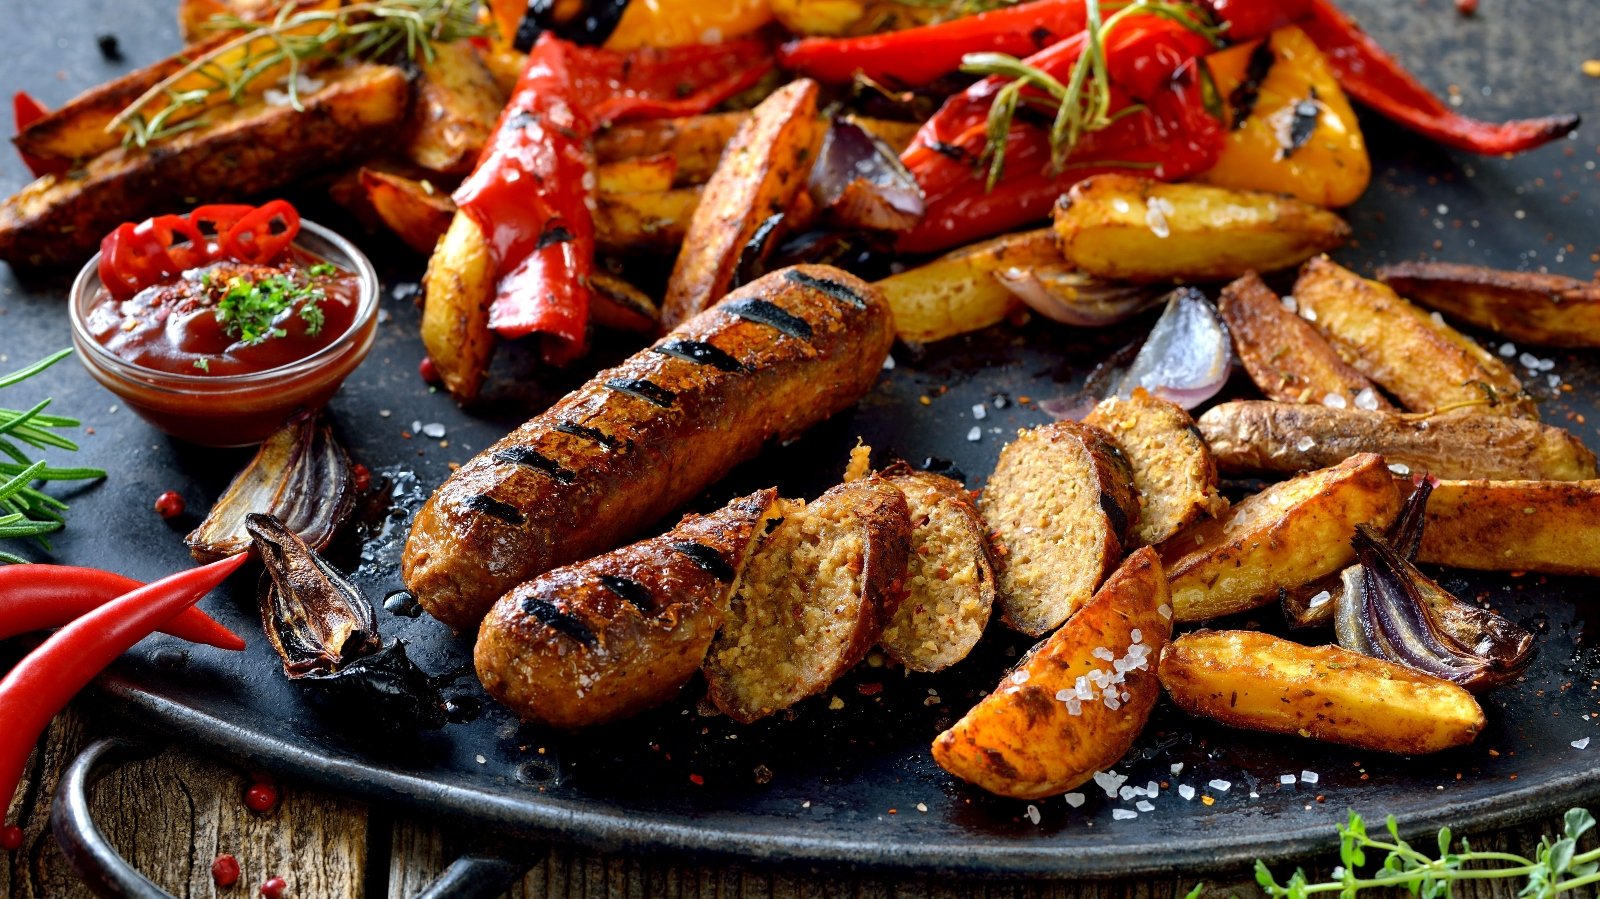 Grilled vegan soy sausages with hot sauce, potato wedges and vegetables